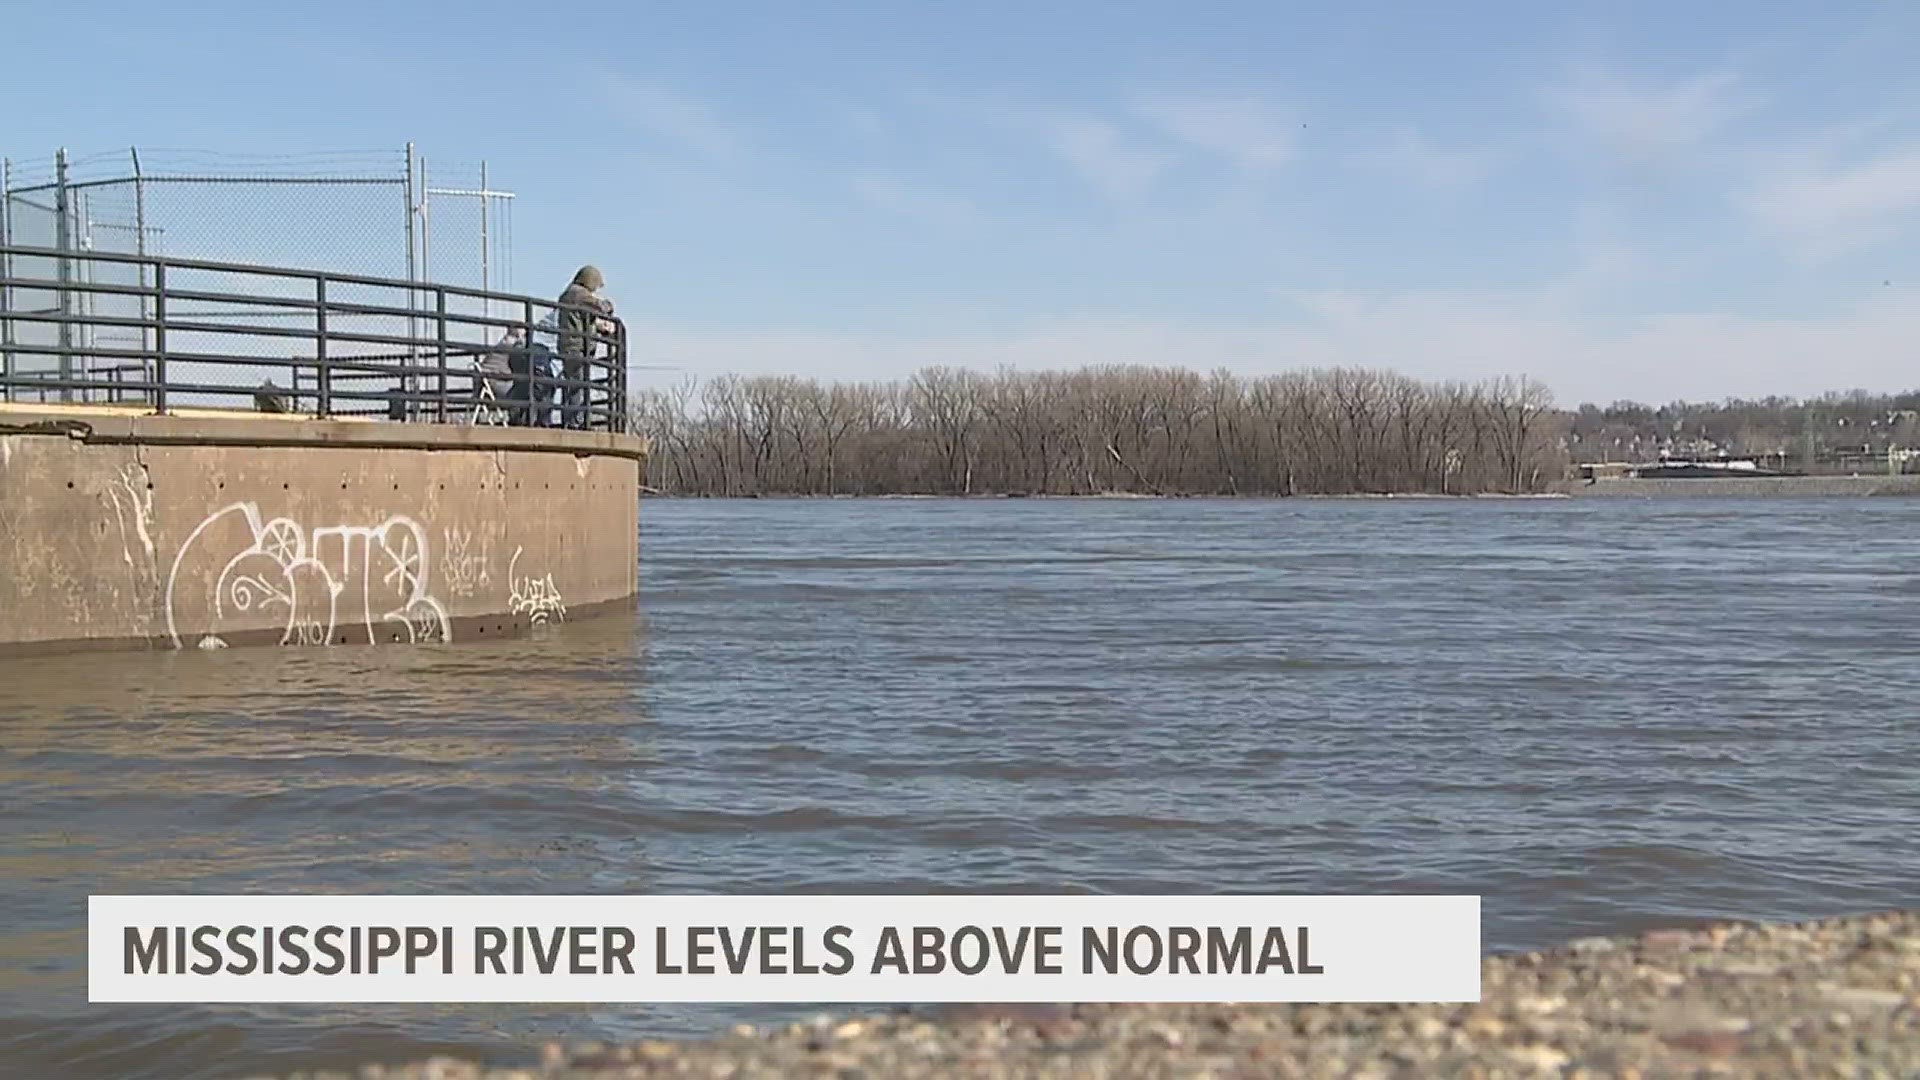 The National Weather Service in the Quad Cities says the Mississippi River in Rock Island will likely surpass flood stage of 15 feet before the end of April.